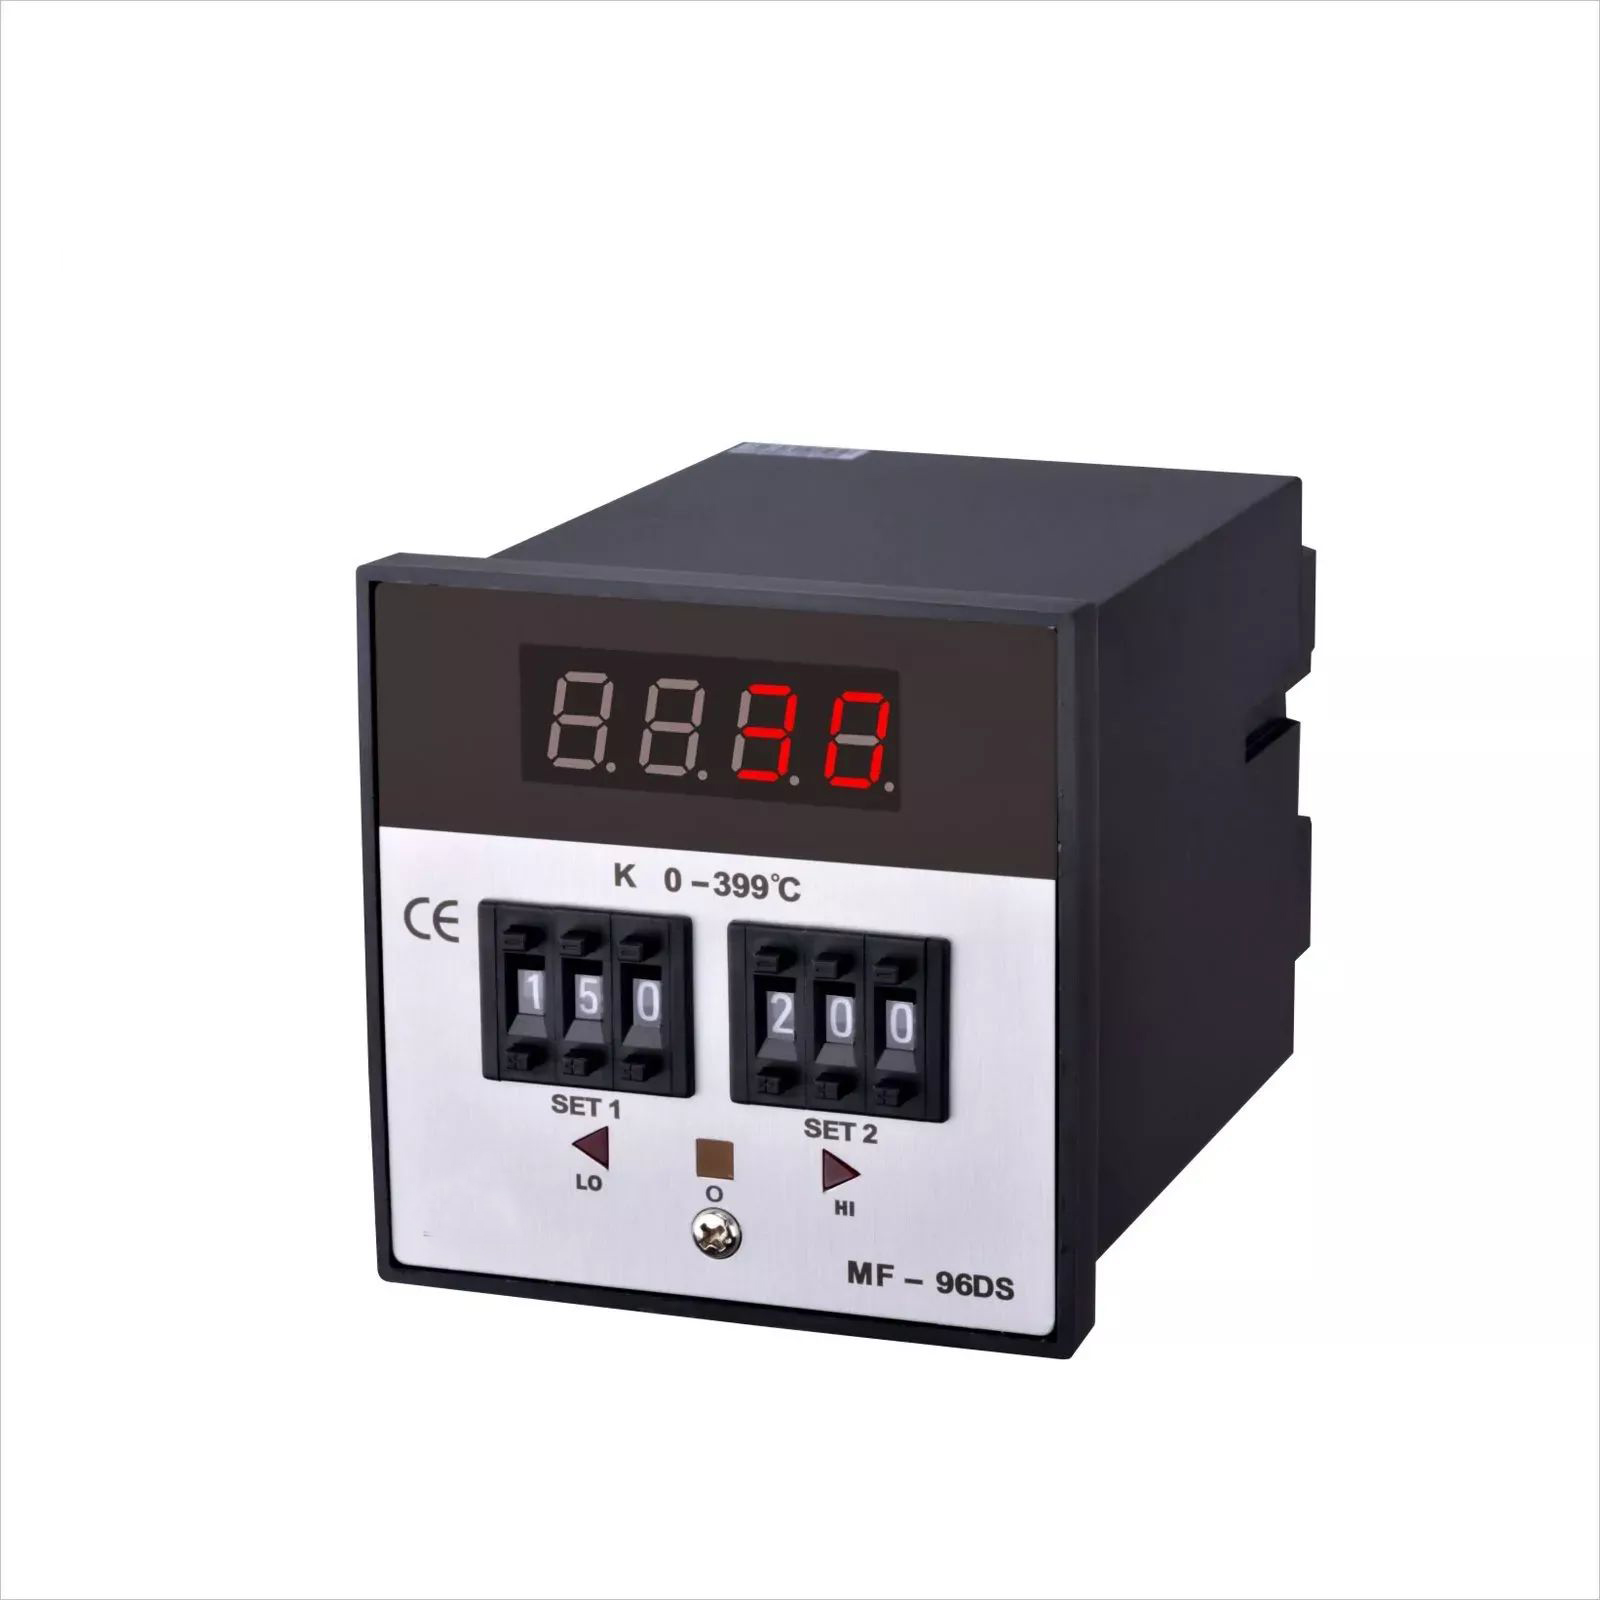 MF-96DS Upper and lower limit control digital display temperature controller thermostat